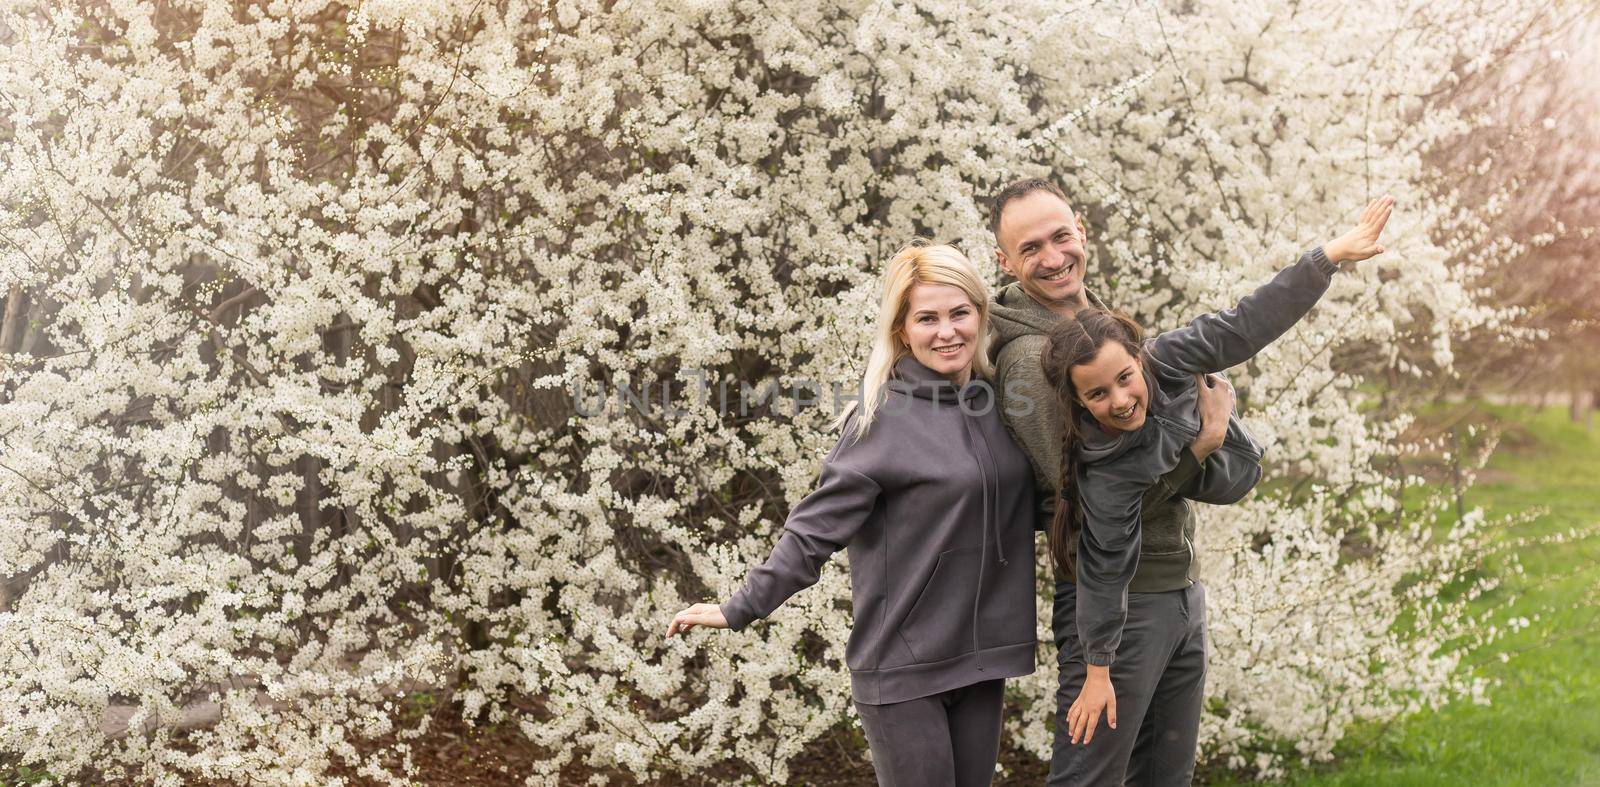 family having fun with flowering tree in blooming spring garden by Andelov13